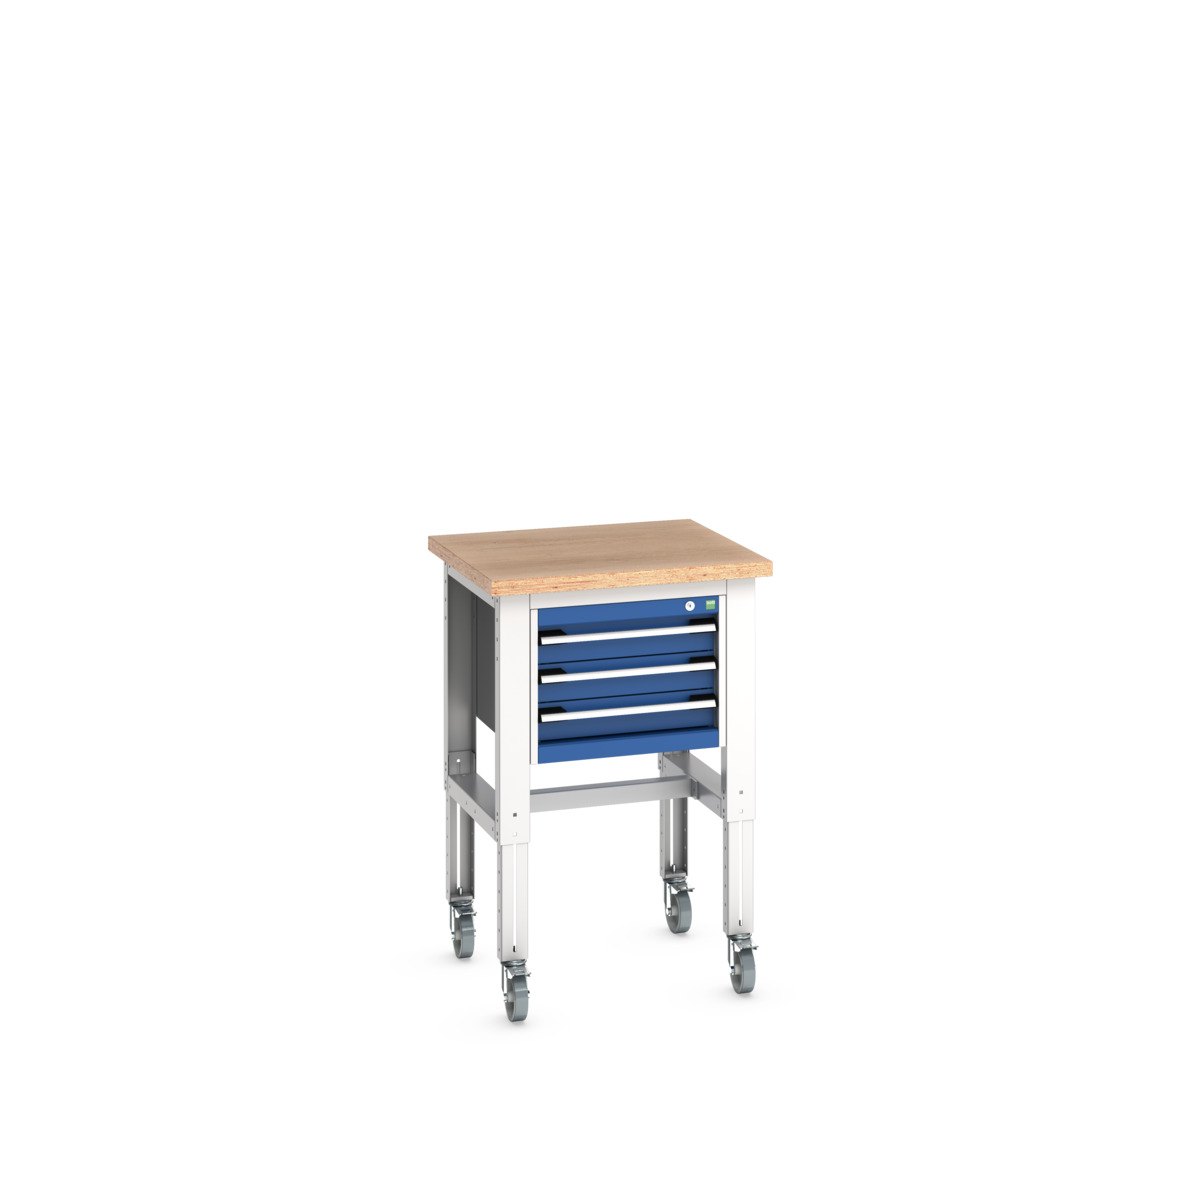 41003527.11V - cubio mobile bench adj height (mpx)